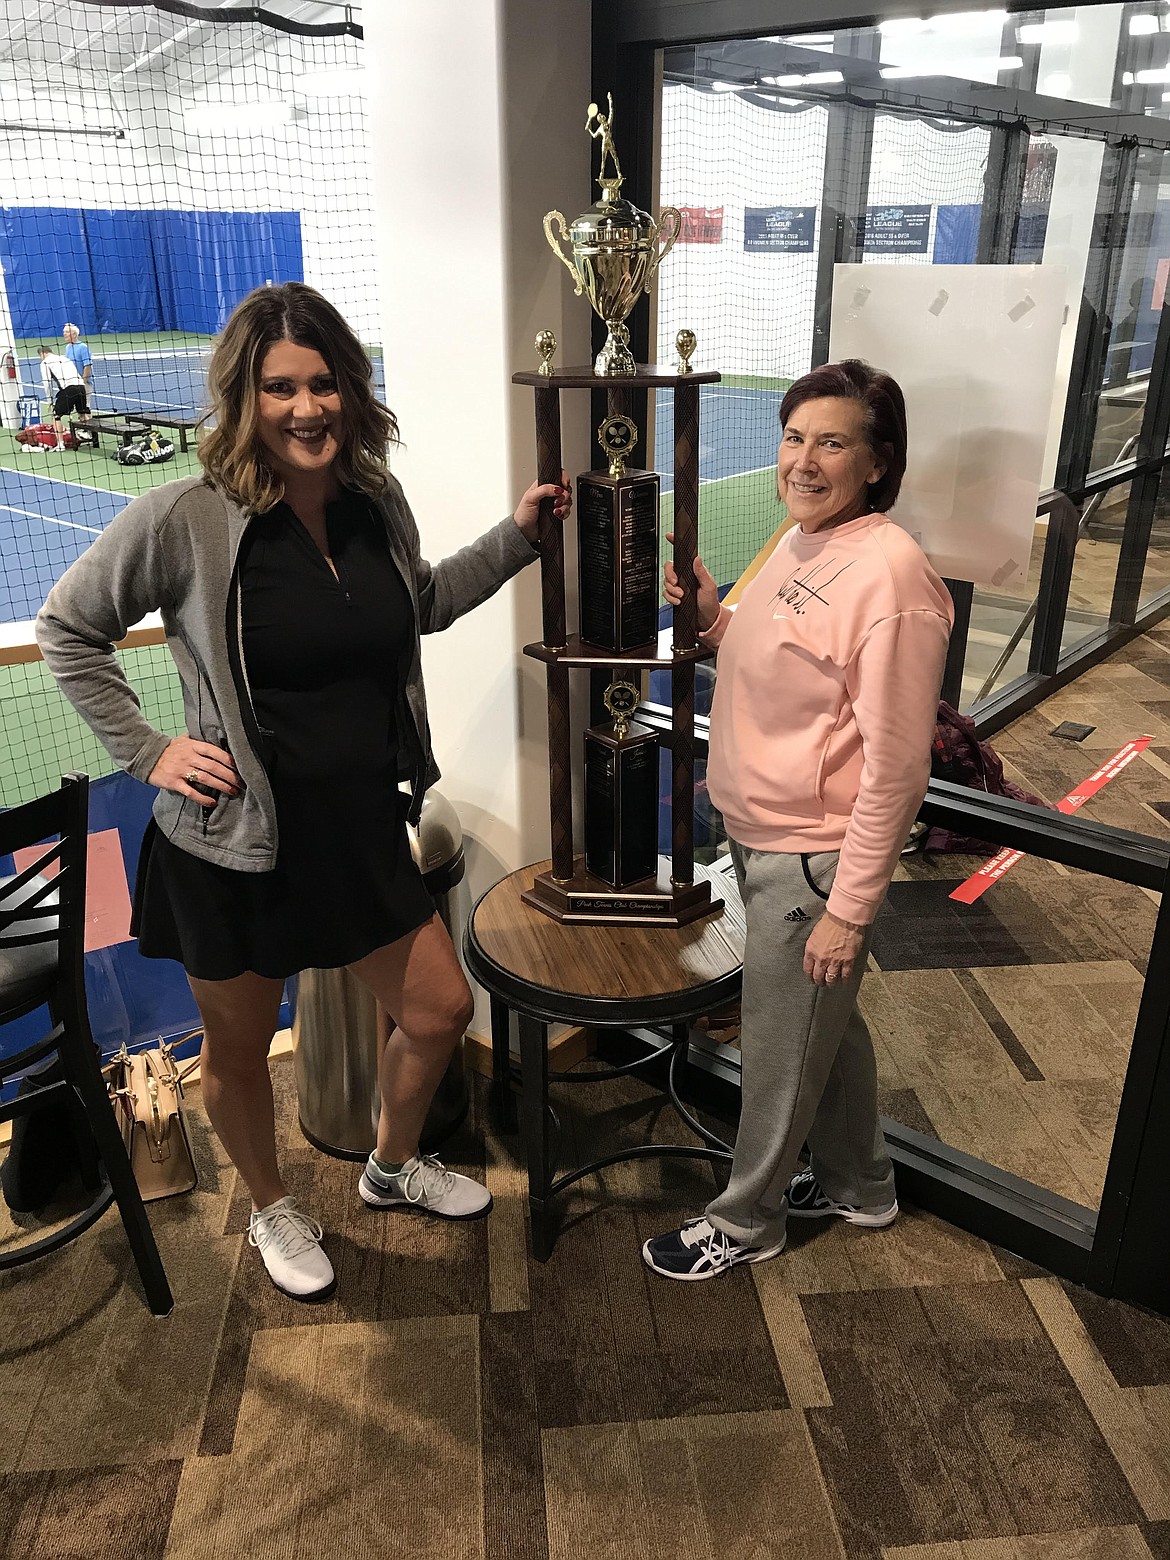 Courtesy photo
Denise Mai, left, and Valerie Garcia won the women's open doubles title at the recent Peak Hayden Member Club Tennis Tournament at Peak Health and Wellness in Hayden. Pepper Rickert and Caitlyn Combes were the other finalists.